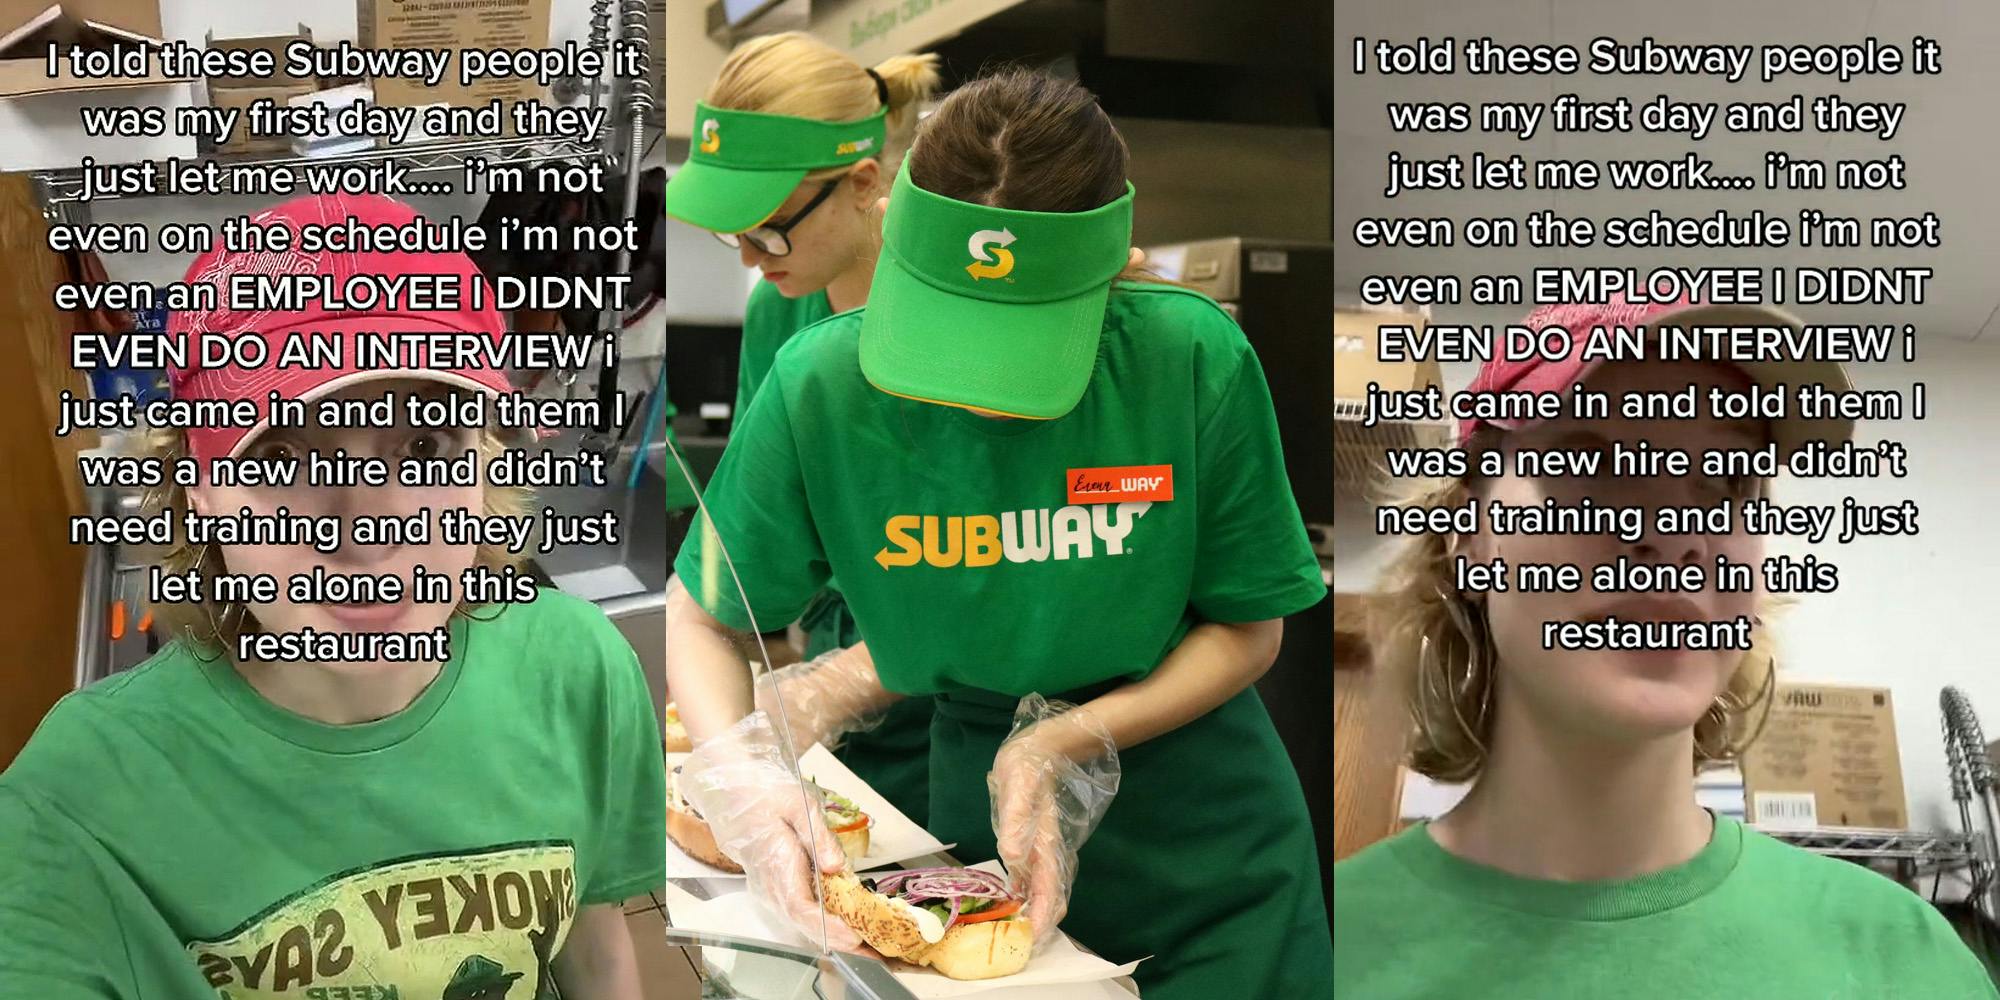 Woman standing in Subway caption "I told these Subway people it was my first day and they just let me work... i'm not even on the schedule i'm not evan an EMPLOYEE I DIDNT EVEN DO AN INTERVIEW i just came in and told them I was a new hire and didn't need training and they just let me alone in this restaurant" (l) woman working at Subway creating sandwich (c) Woman standing in Subway caption "I told these Subway people it was my first day and they just let me work... i'm not even on the schedule i'm not evan an EMPLOYEE I DIDNT EVEN DO AN INTERVIEW i just came in and told them I was a new hire and didn't need training and they just let me alone in this restaurant" (r)